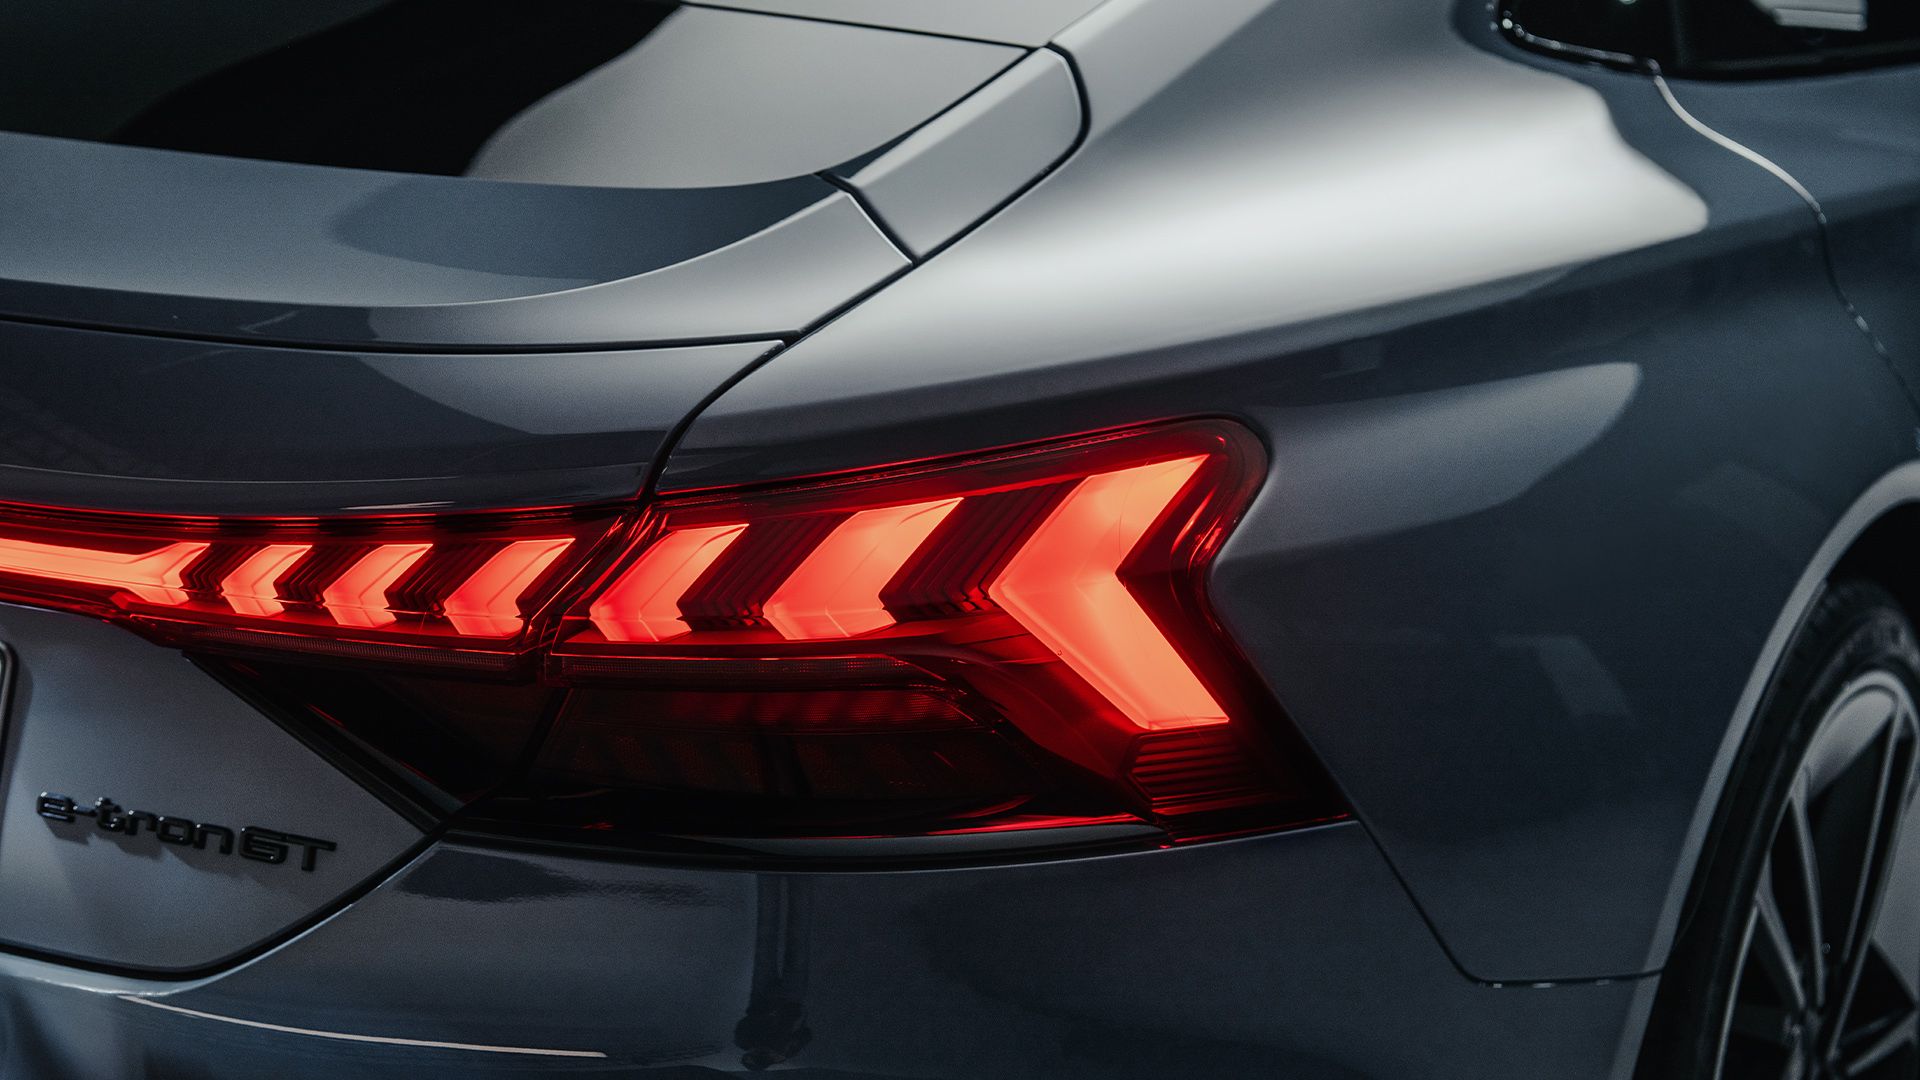 The rear view of the Audi RS e-tron GT highlights its taillights.